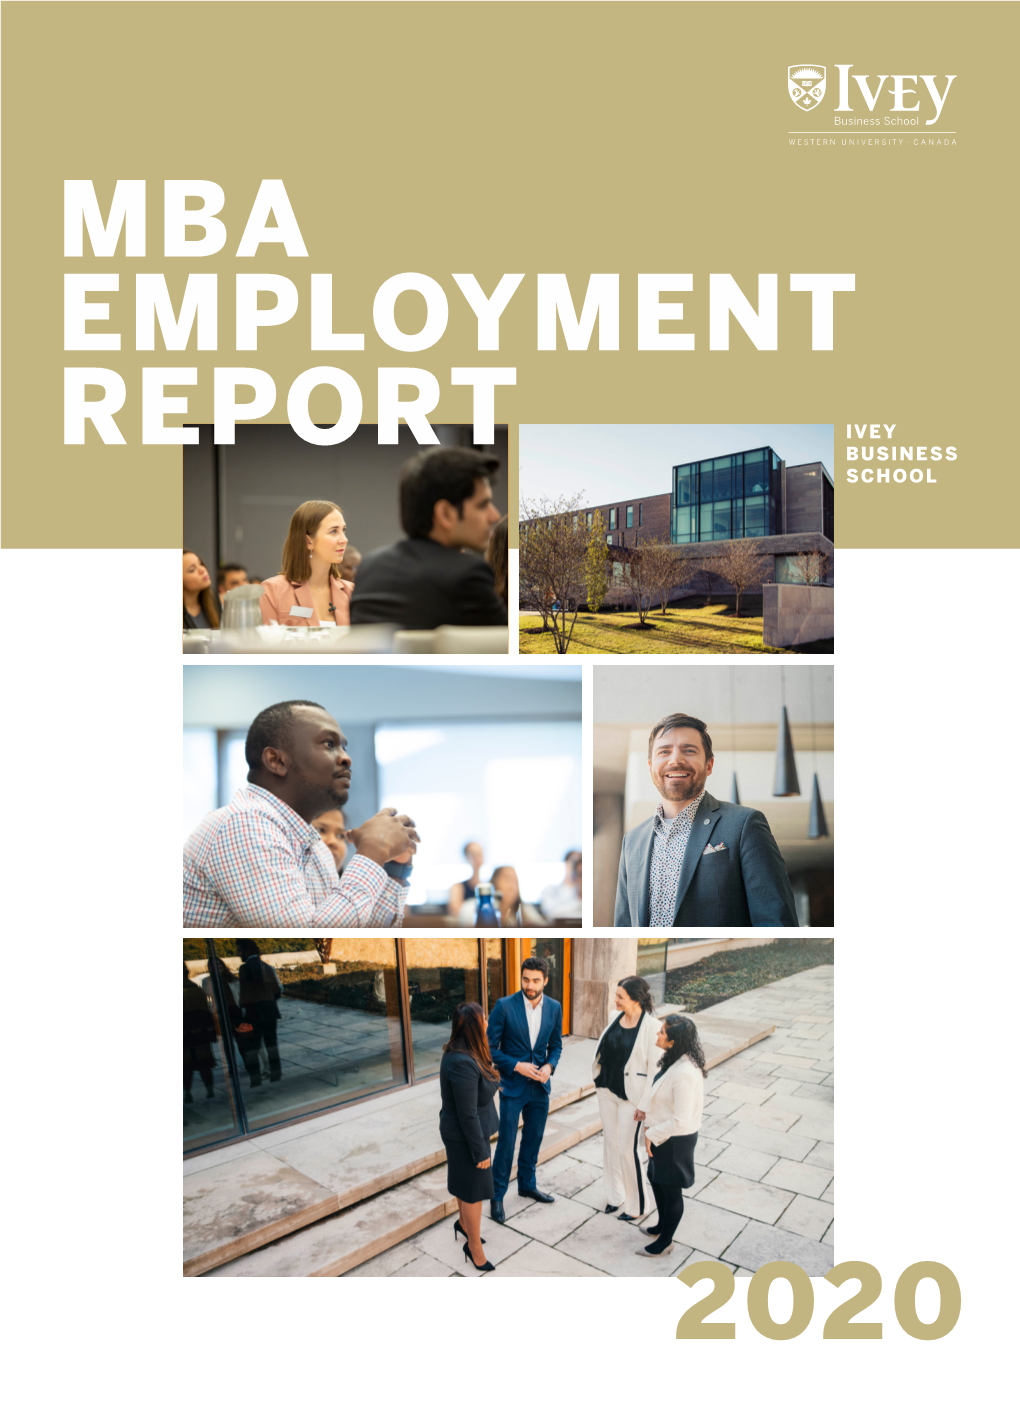 Mba Employment Report 2020